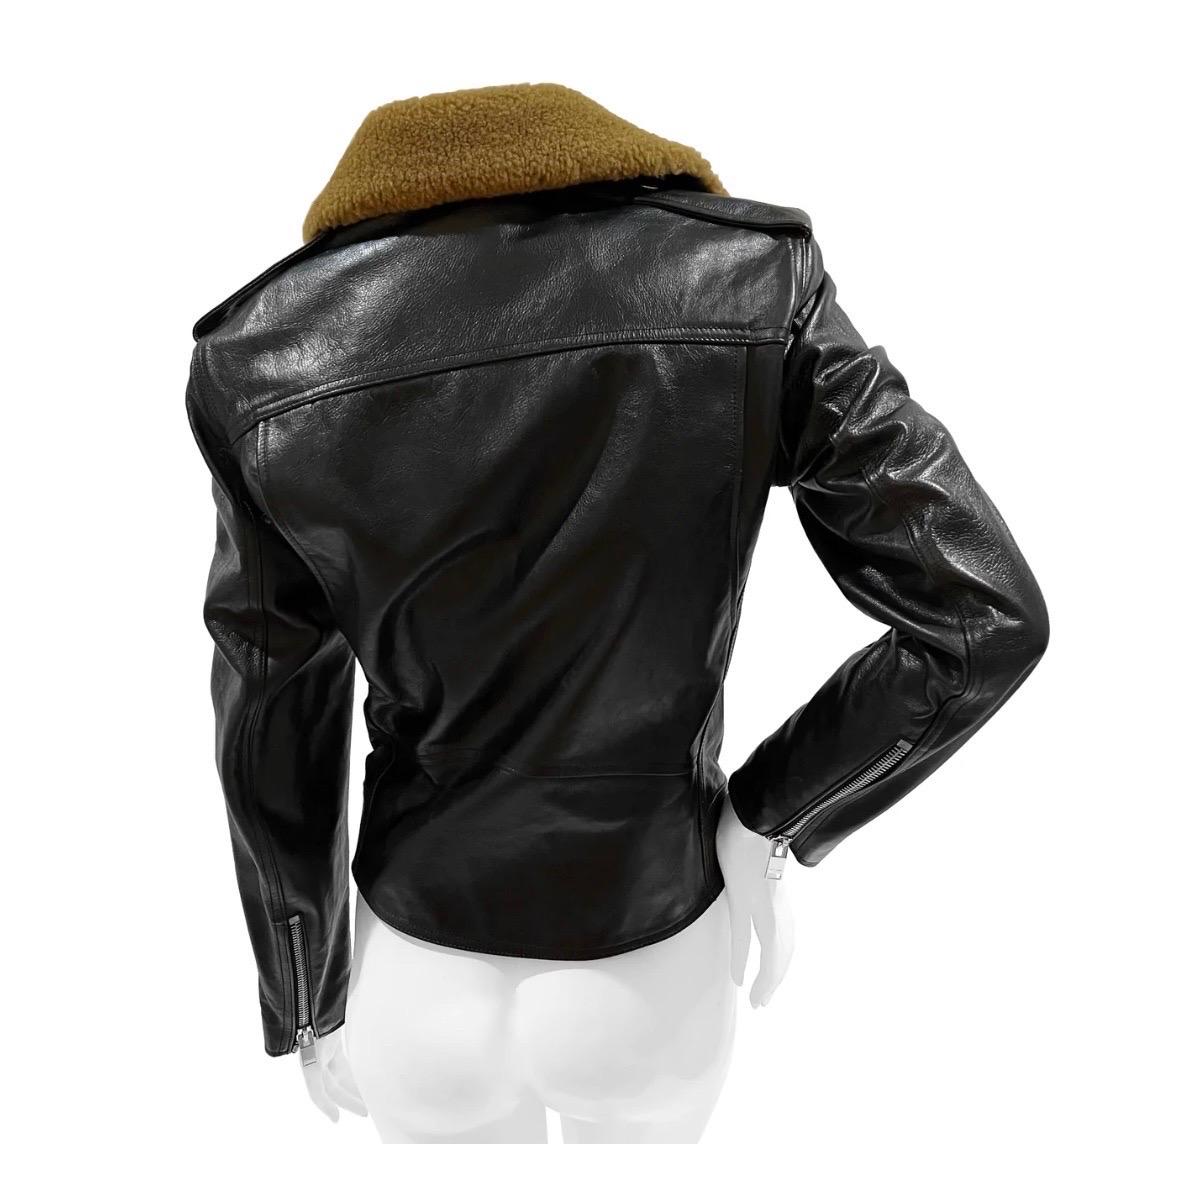 Motorcycle Leather Jacket with Shearling by Saint Laurent
Black leather
Tan shearling detail on collar
Asymmetrical zip up closure
Silver tone closure
Neckline collar has snap button closure
Dual side pockets with zip closure
Single small left